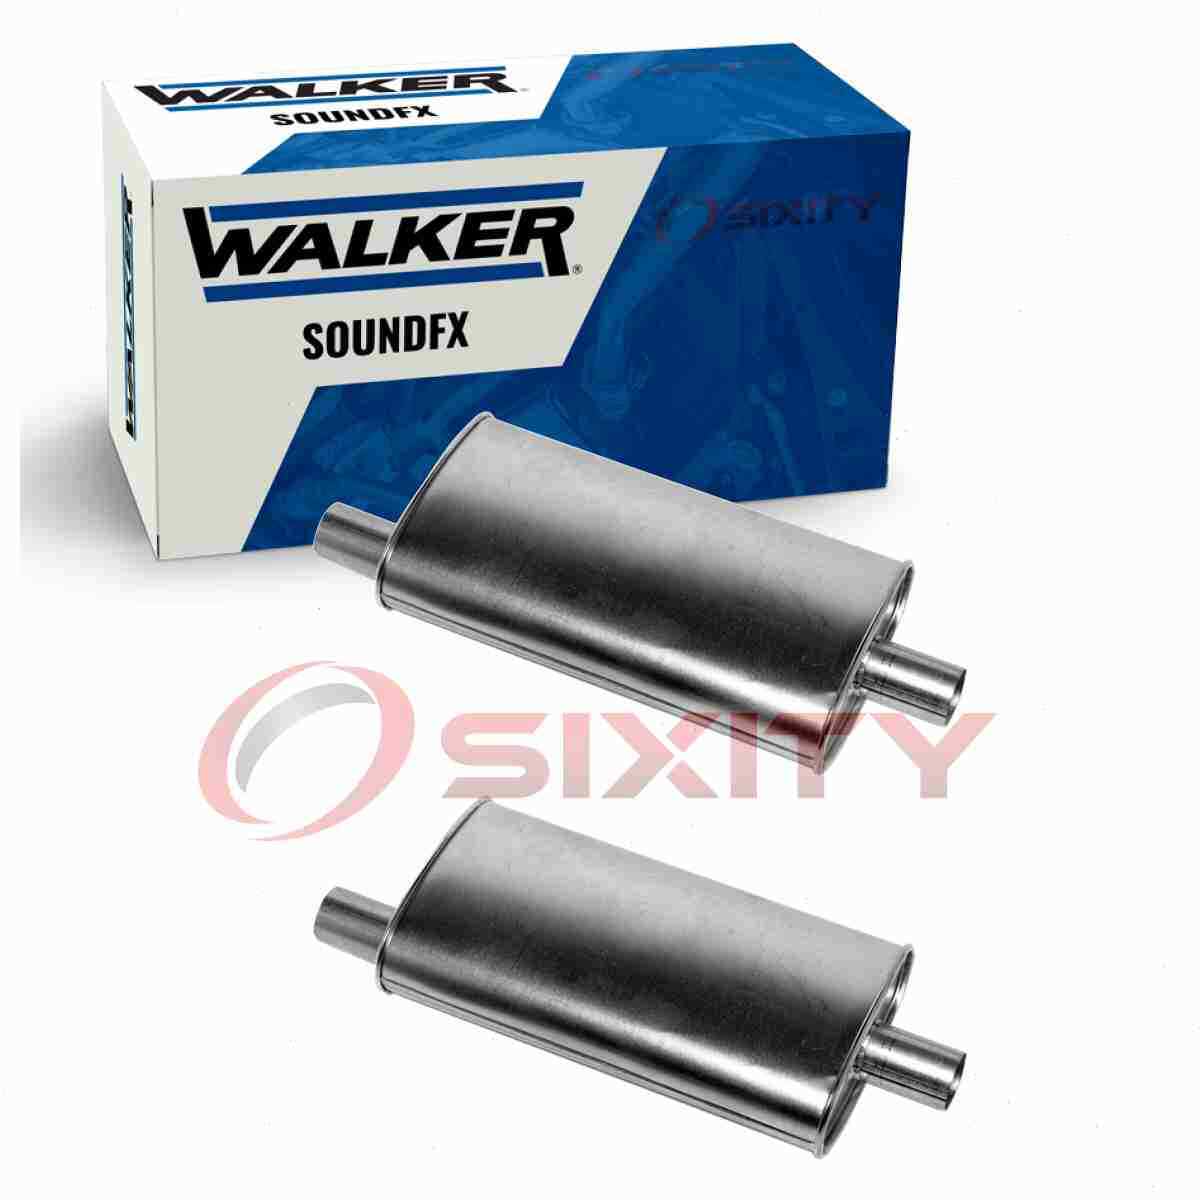 2 pc Walker SoundFX Exhaust Mufflers for 1967-1970 Plymouth GTX 7.0L 7.2L V8 gf